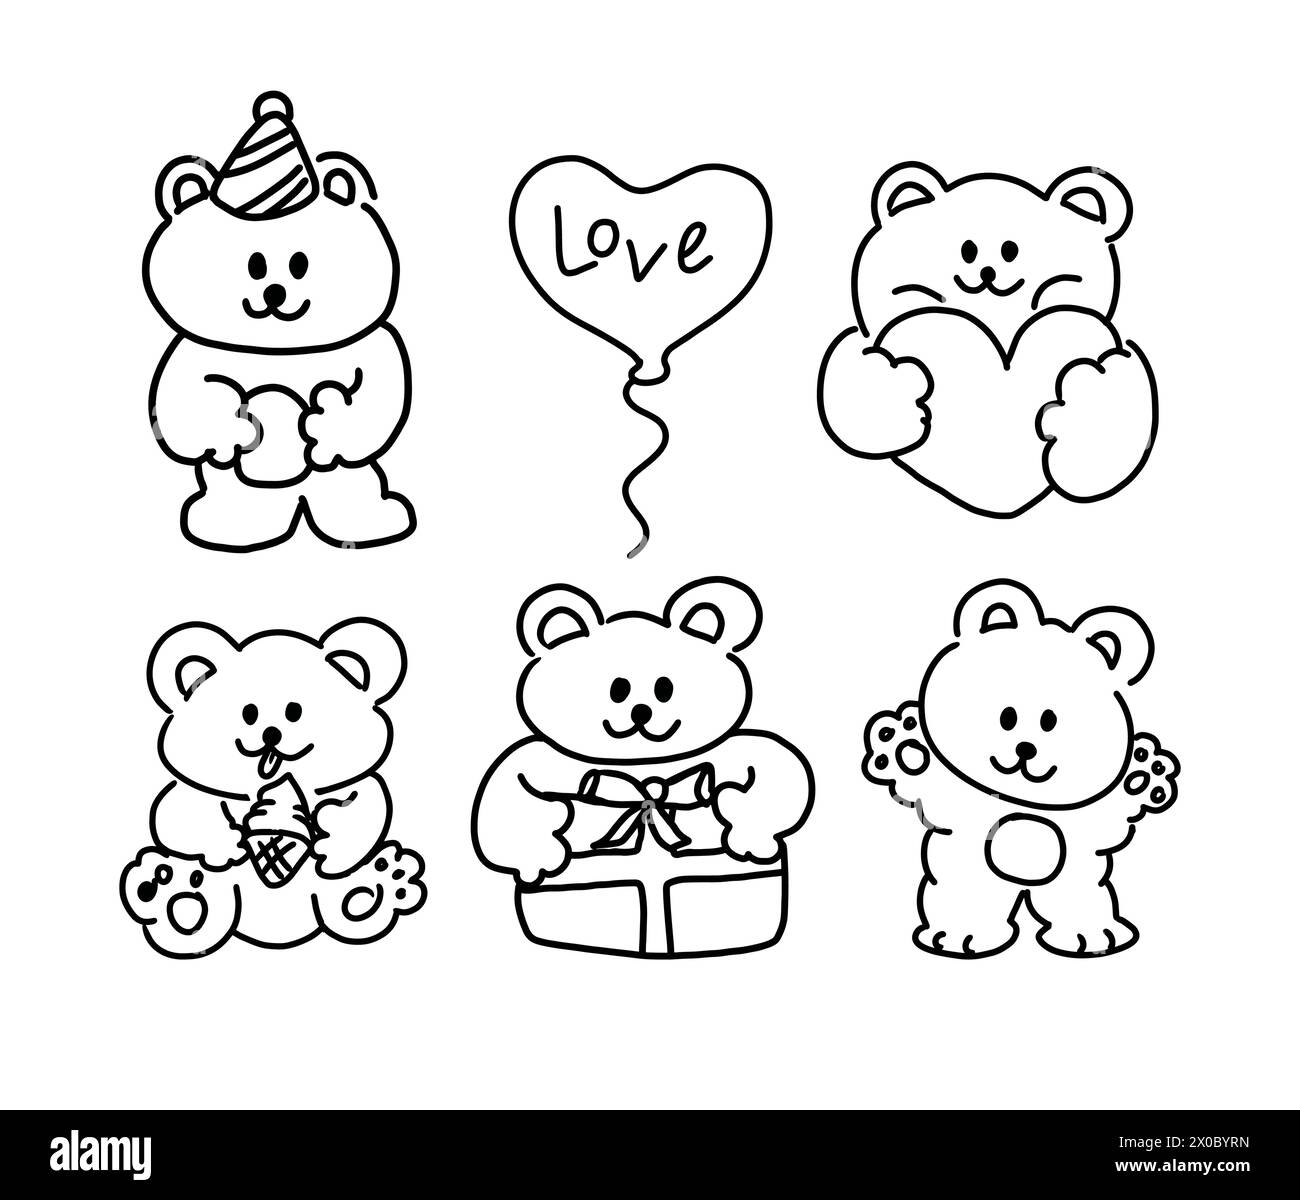 Hand drawn outlines of teddy bear, heart, balloon, gift box, party hat, ice cream for kid colouring book, black and white stickers, cartoon, mascot Stock Vector